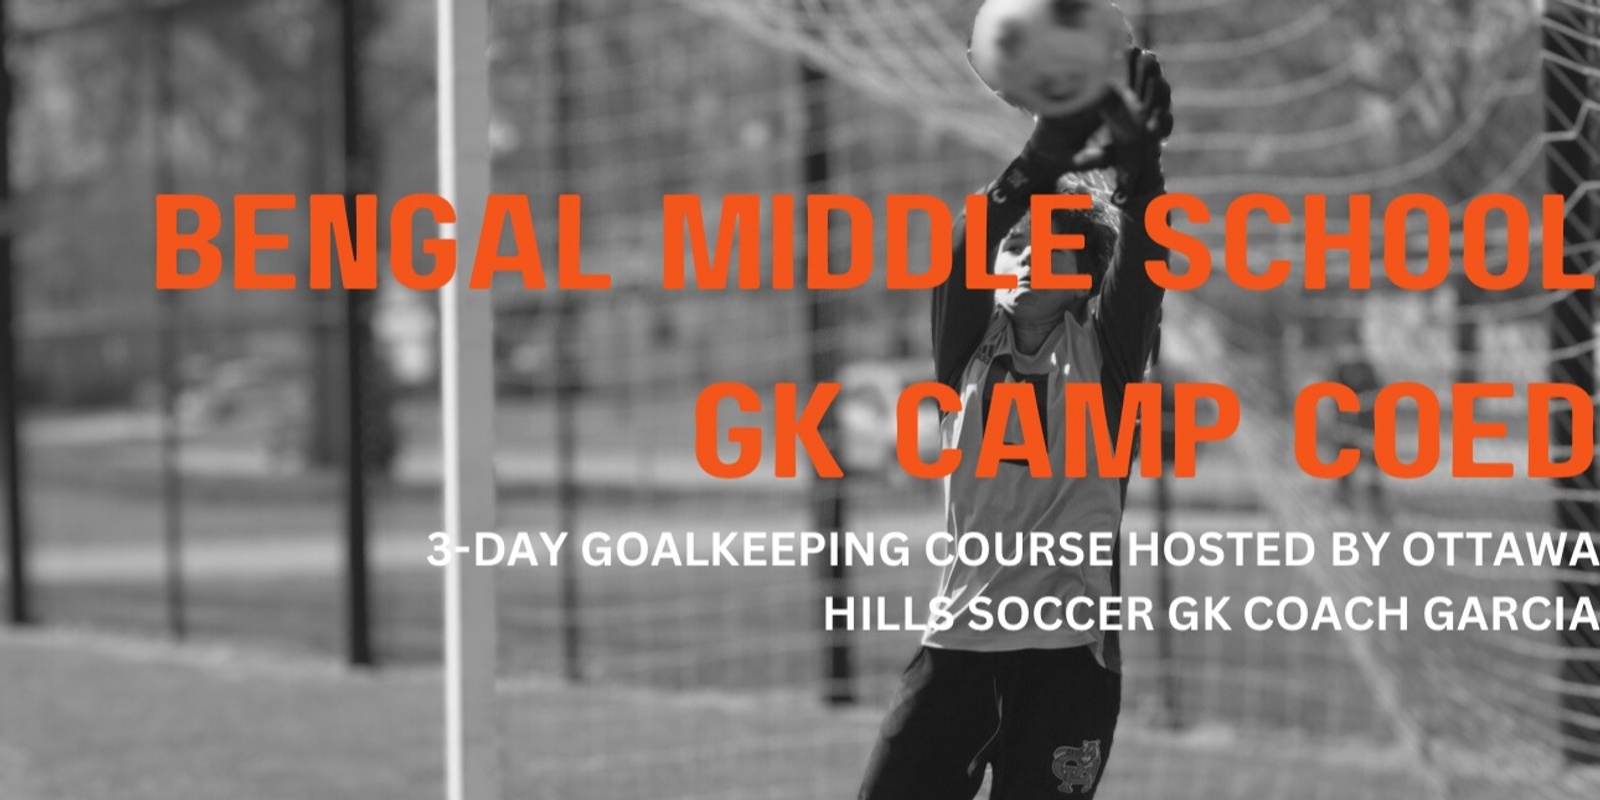 Banner image for Bengal Middle School GK Camp COED